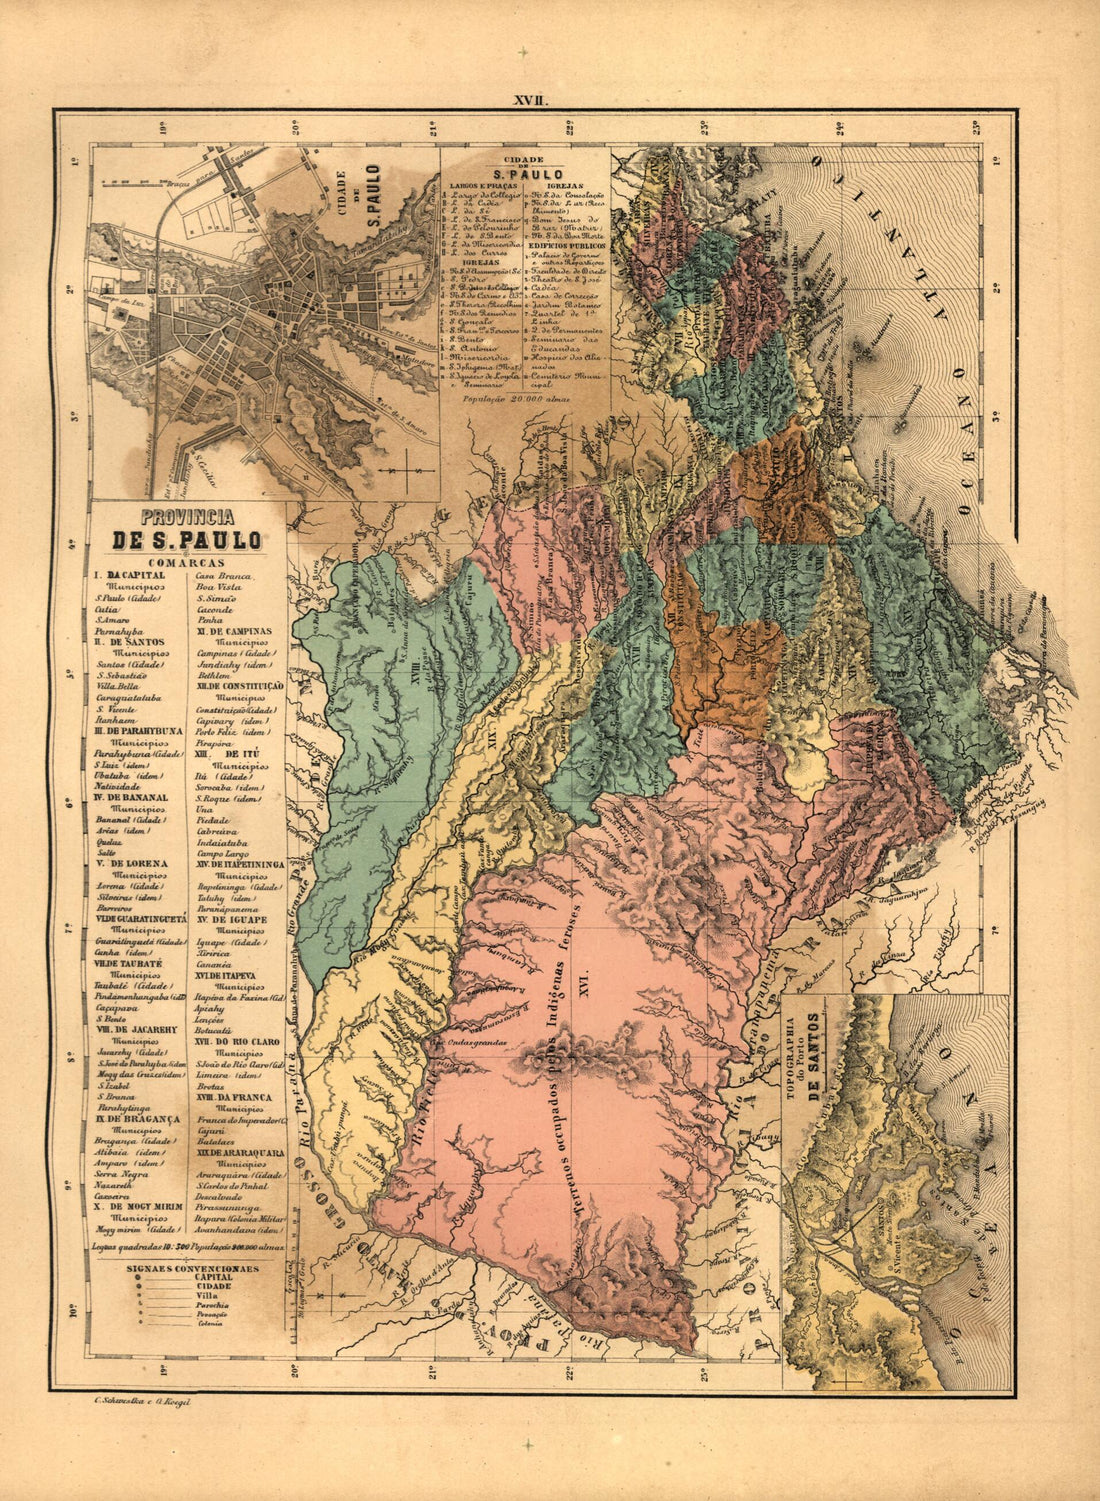 This old map of Provincia De S. Paulo from Atlas Do Imperio Do Brazil from 1868 was created by Cândido Mendes in 1868